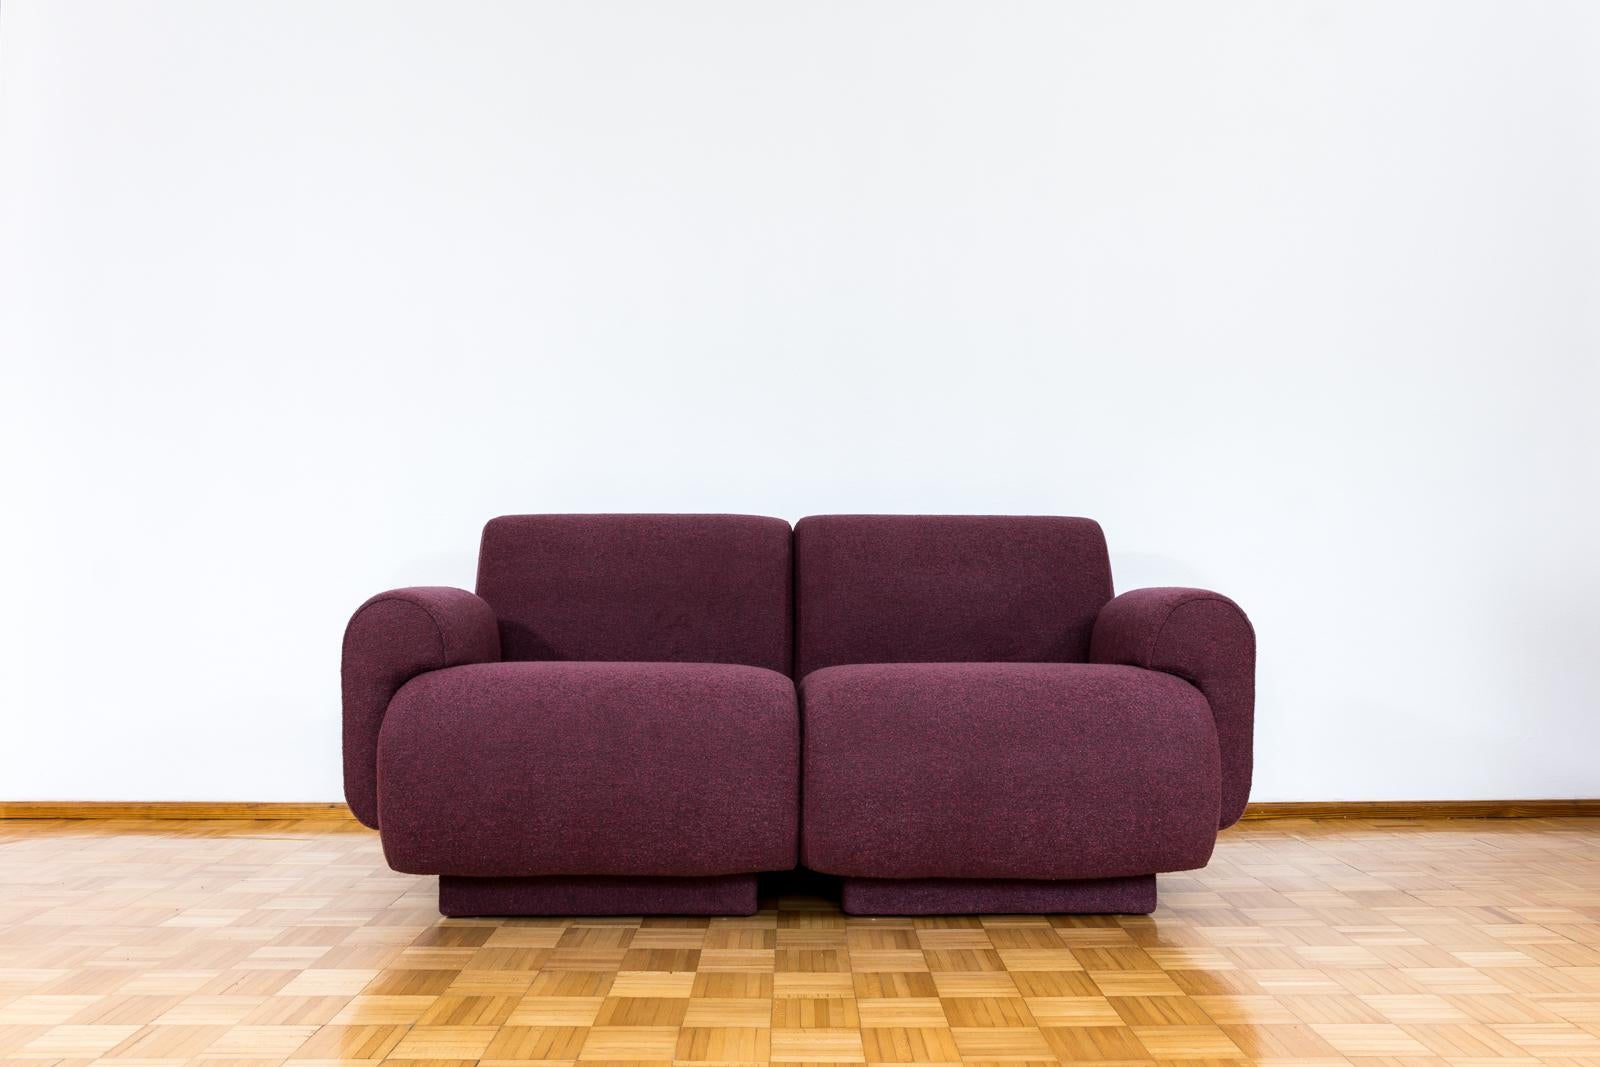 Modular Sofa from Oelsa Furniture Factory in Rabenau, Germany, 1978.
Fully upholstered in dark purple soft fabric.
This two-seater sofa is modular and easy can be transform into 2 armchairs (all armrests are removable)
Armchair dimension: H70, W88,